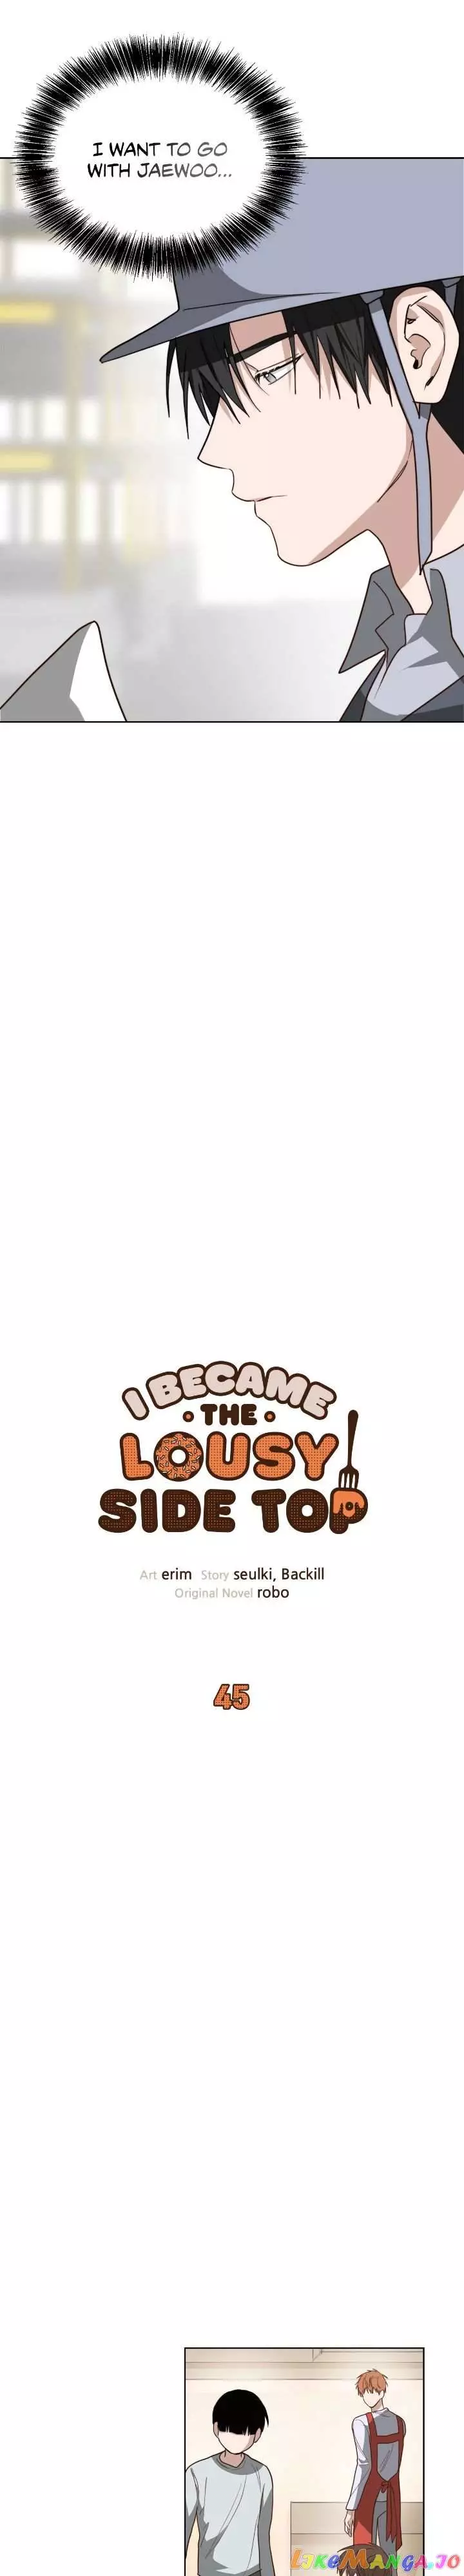 I Became The Lousy Side Top - 45 page 4-5df3f707